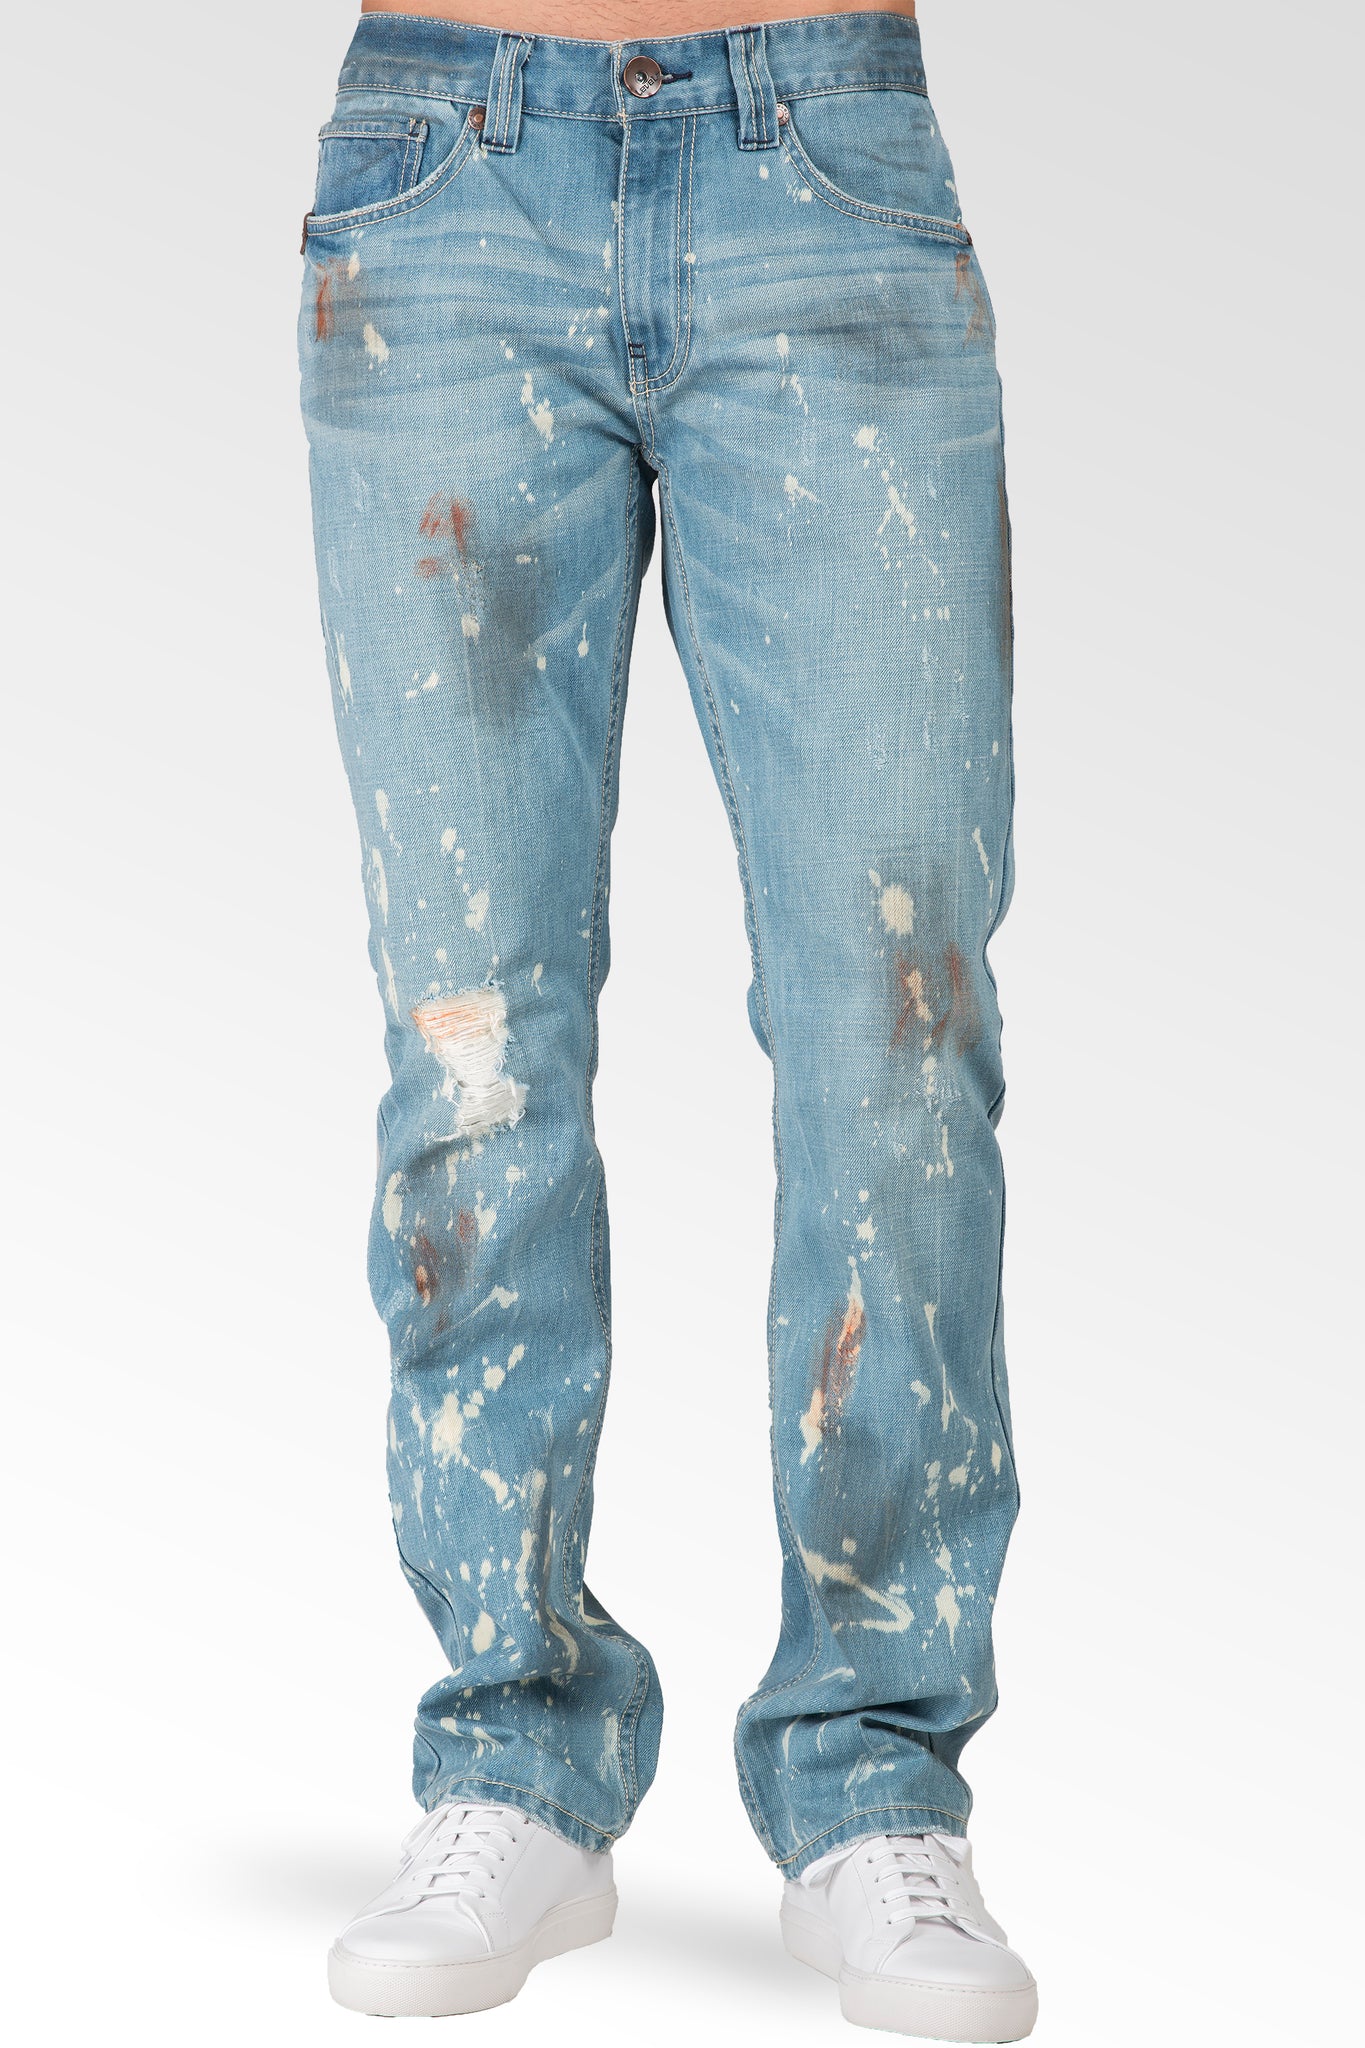 Jeans & Pants | Blue Jeans With White Patches | Freeup